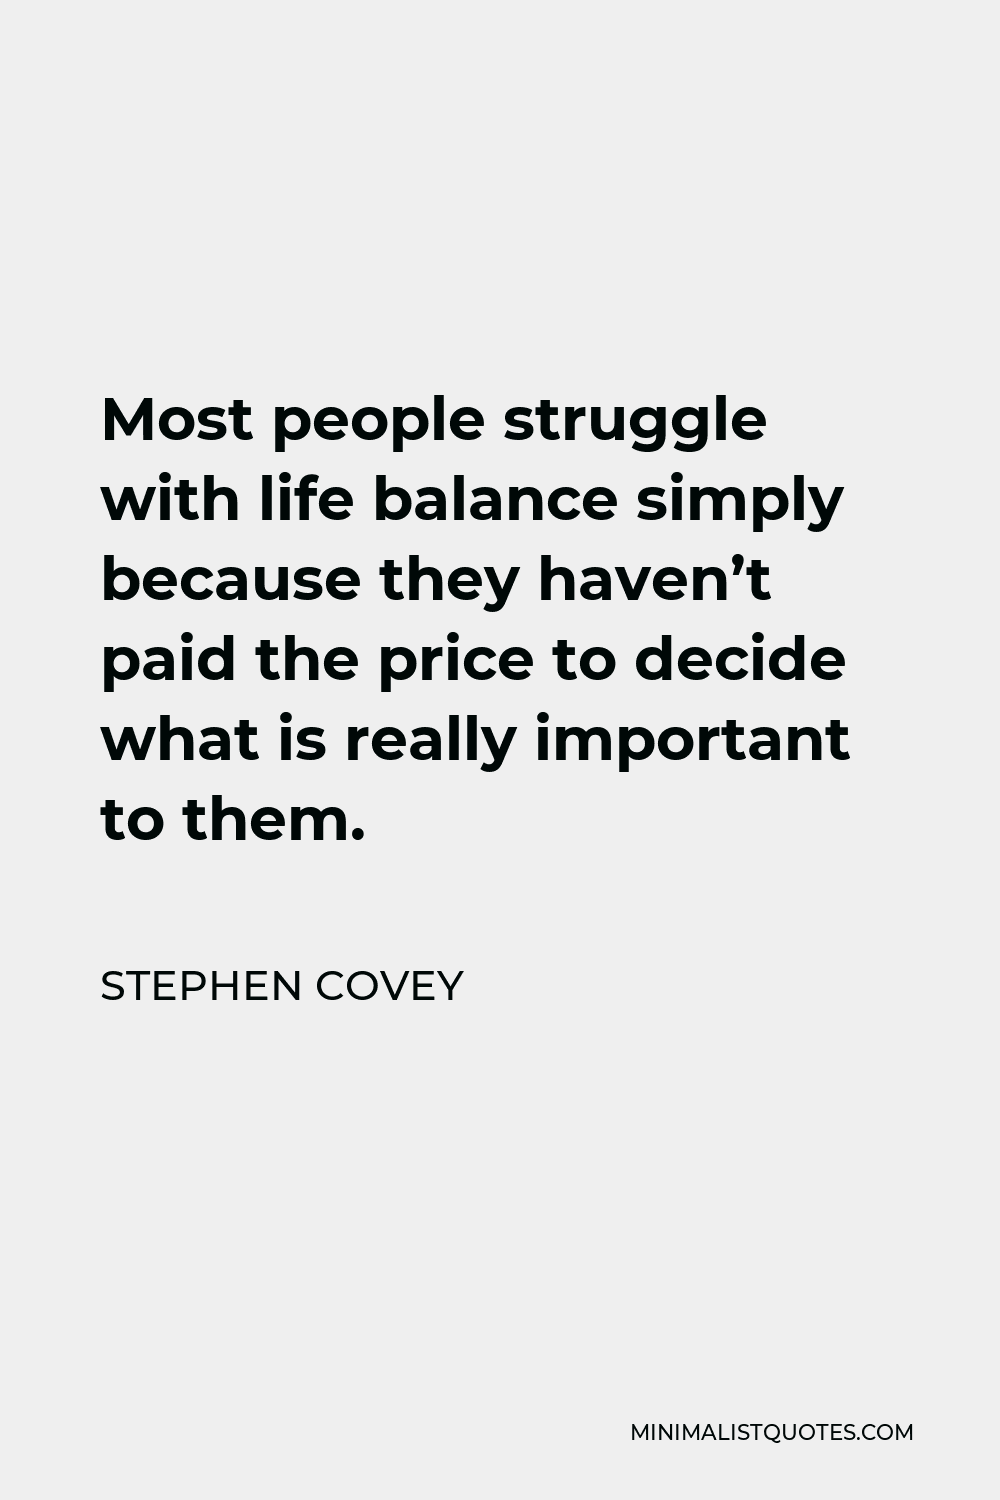 Stephen Covey Quote - Most people struggle with life balance simply because they haven’t paid the price to decide what is really important to them.